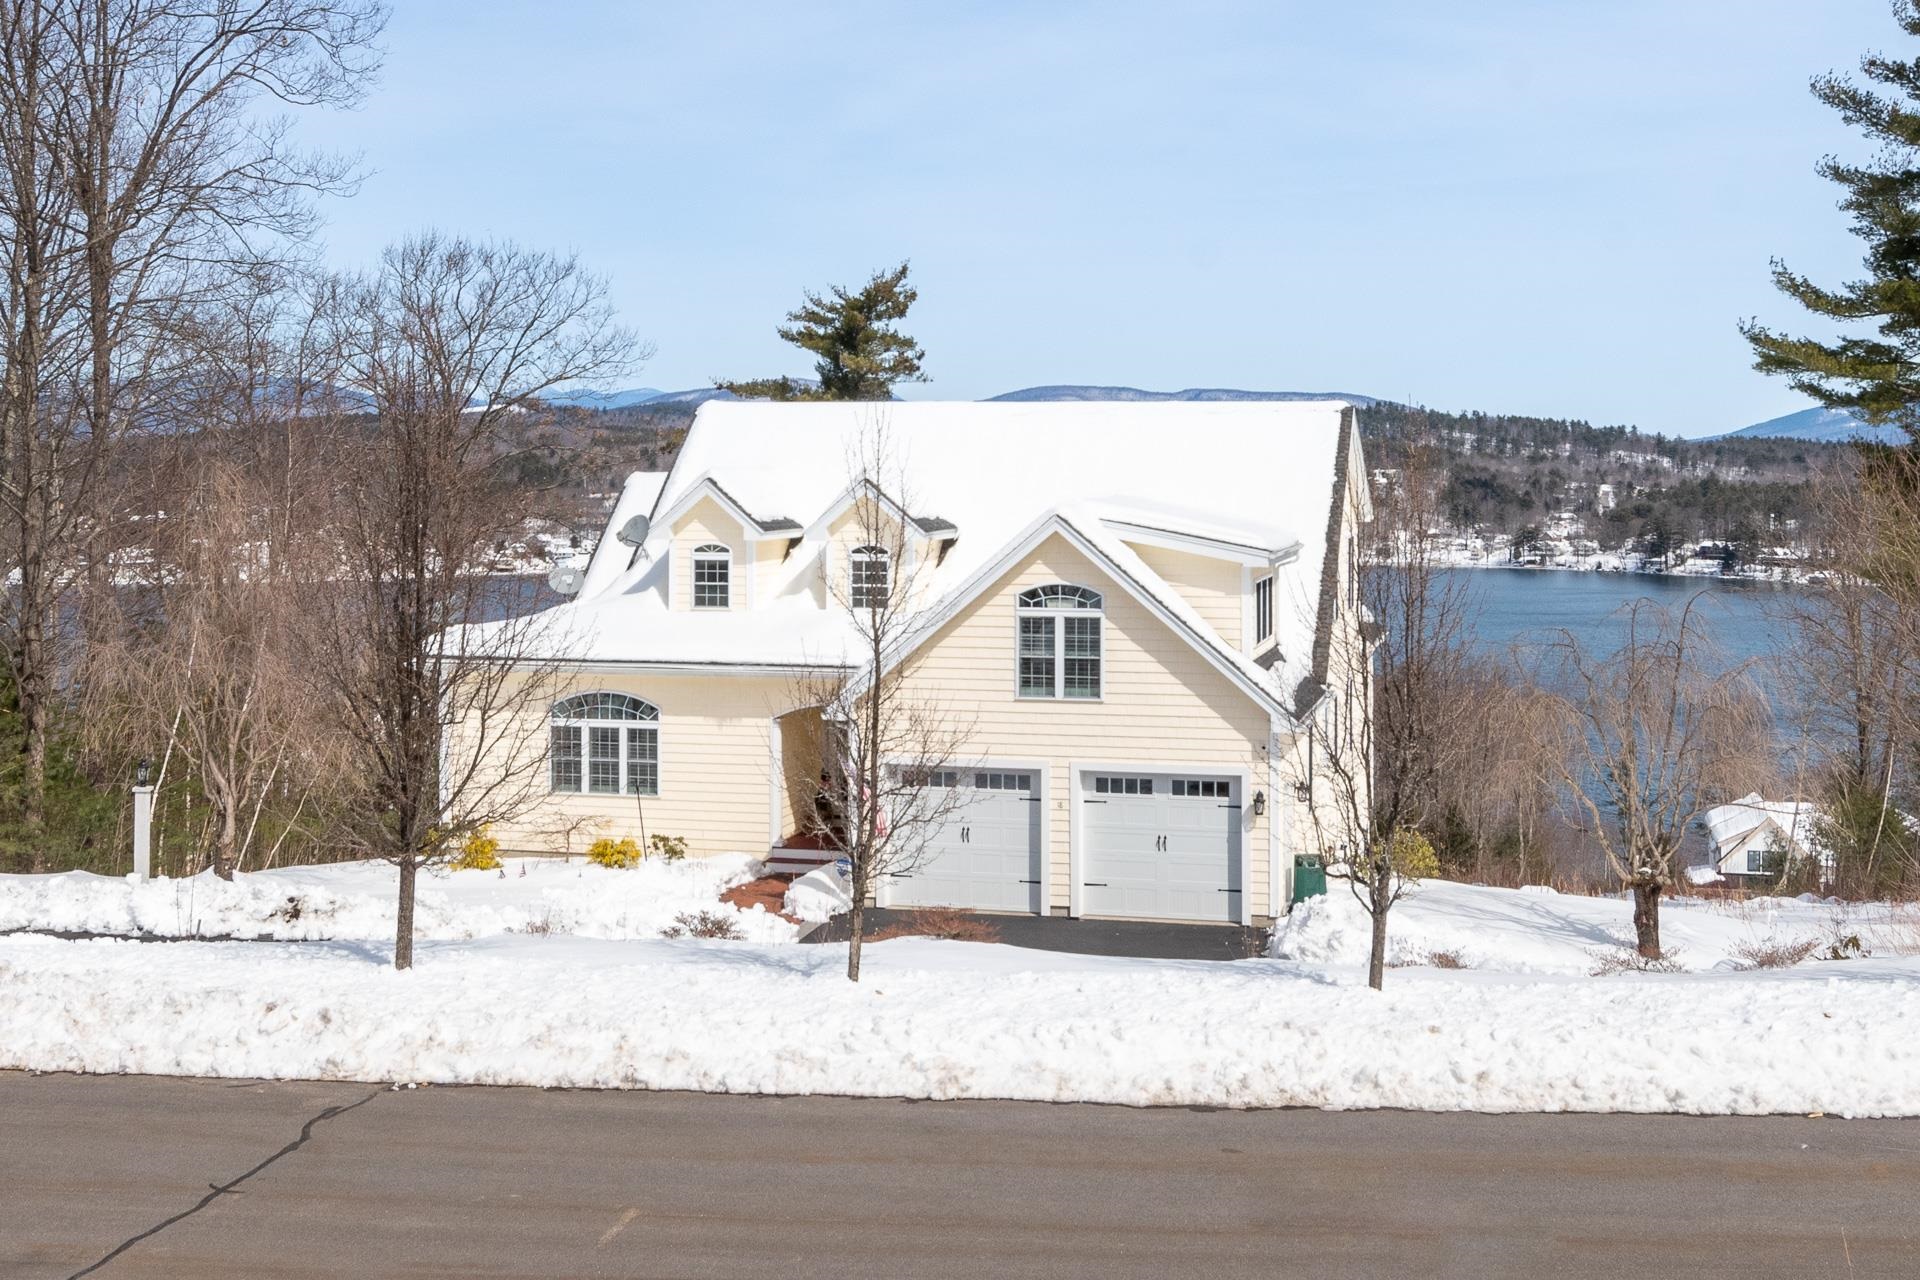 Close to 93 corridor for easy access to all NH Ski Mountains